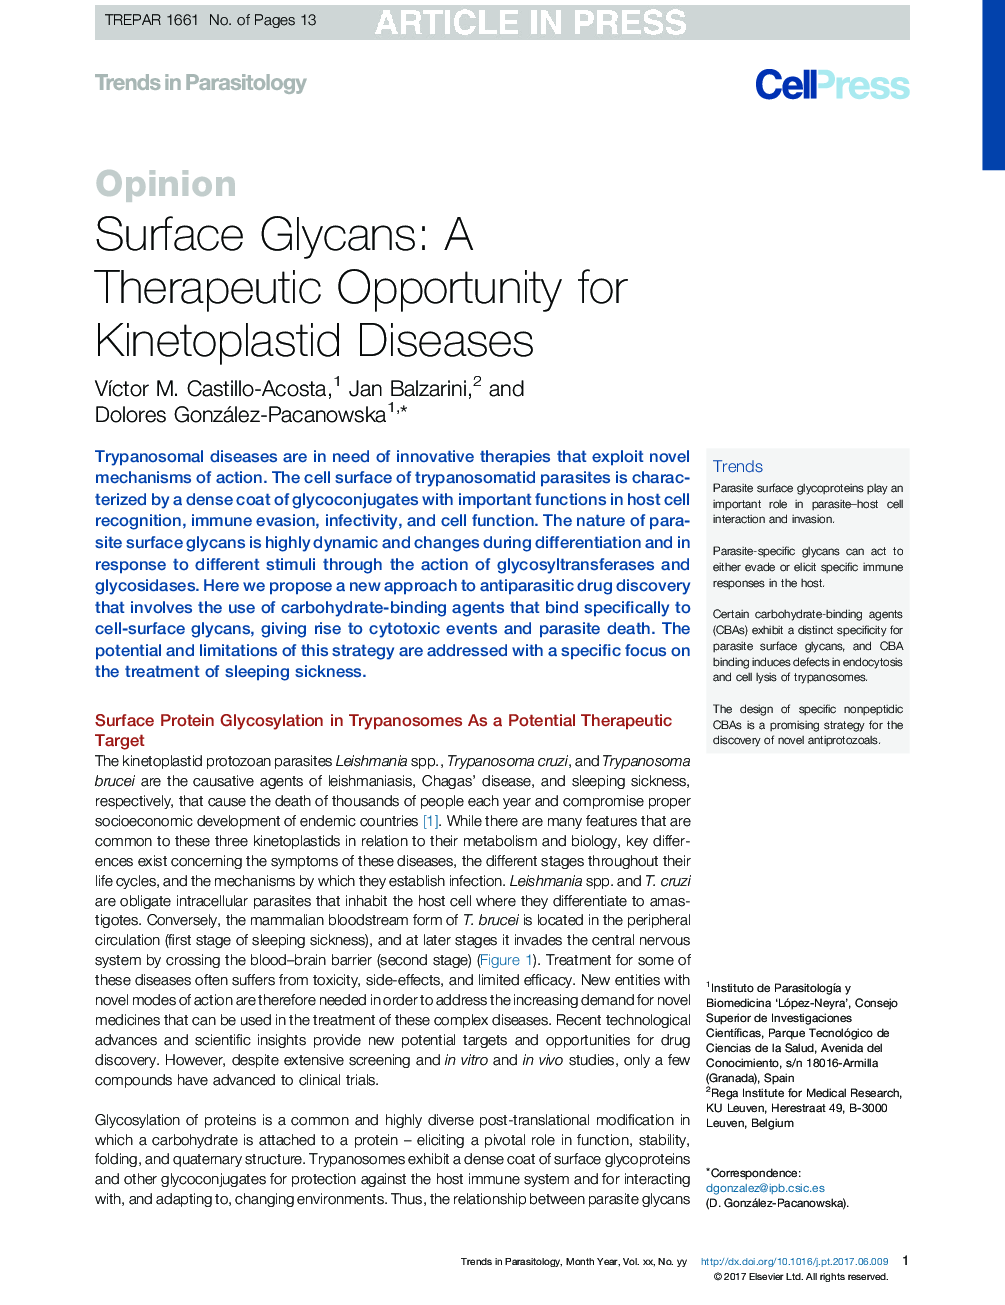 Surface Glycans: A Therapeutic Opportunity for Kinetoplastid Diseases